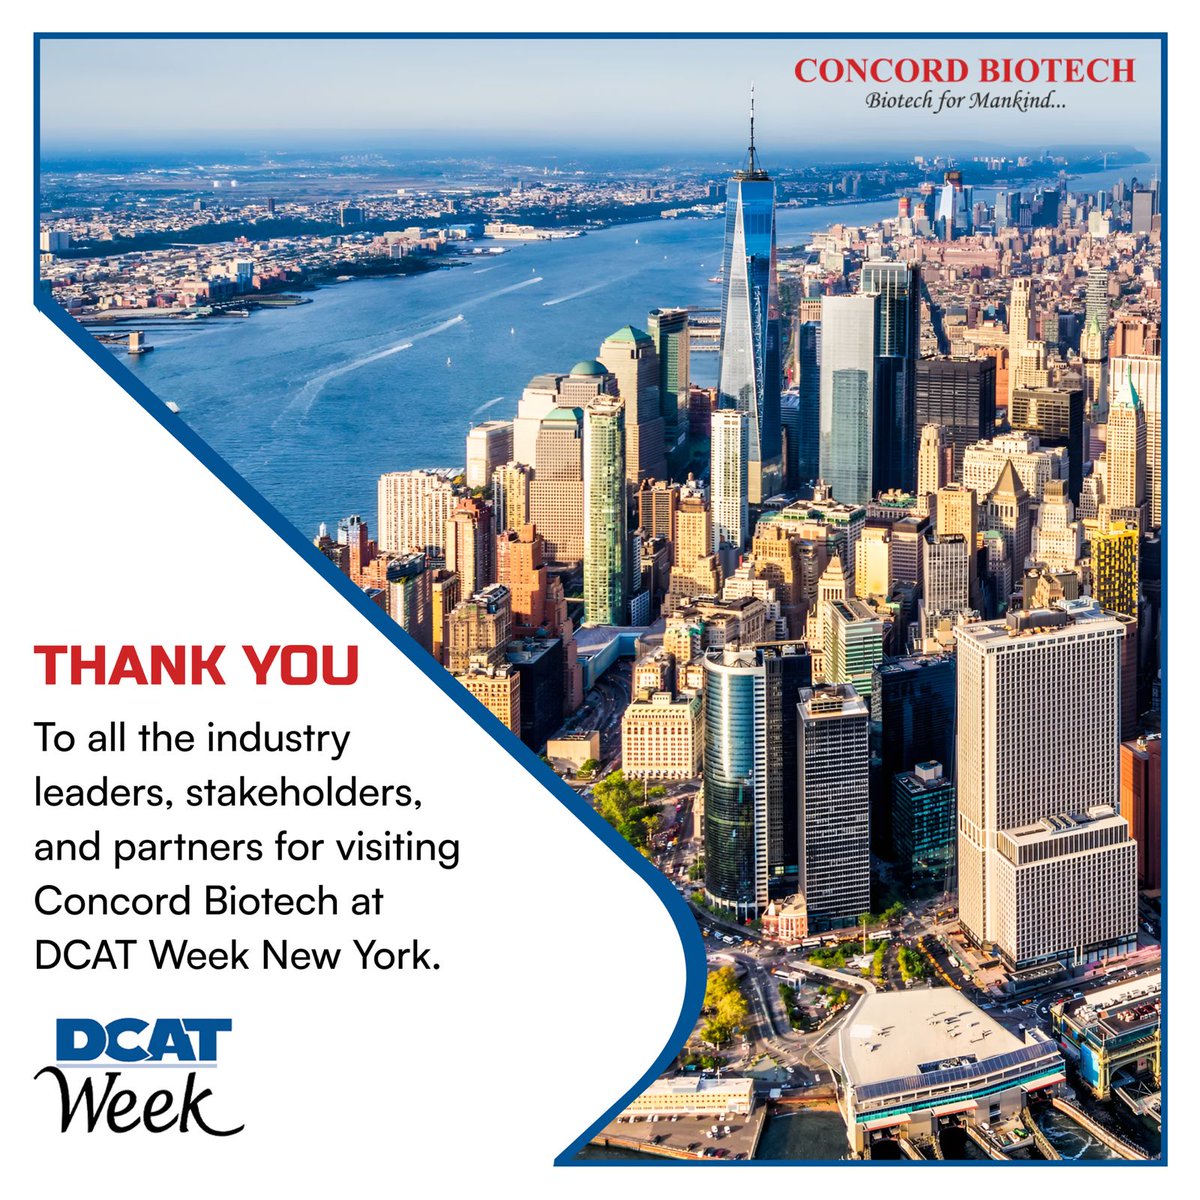 Thank you to all industry leaders who joined us at #DCAT Week in New York. #ConcordBiotech had a successful event, exploring new horizons and fostering collaboration. 

#dcat #dcatweek #pharmaevent #biotech #API #collaboration #globalpresence